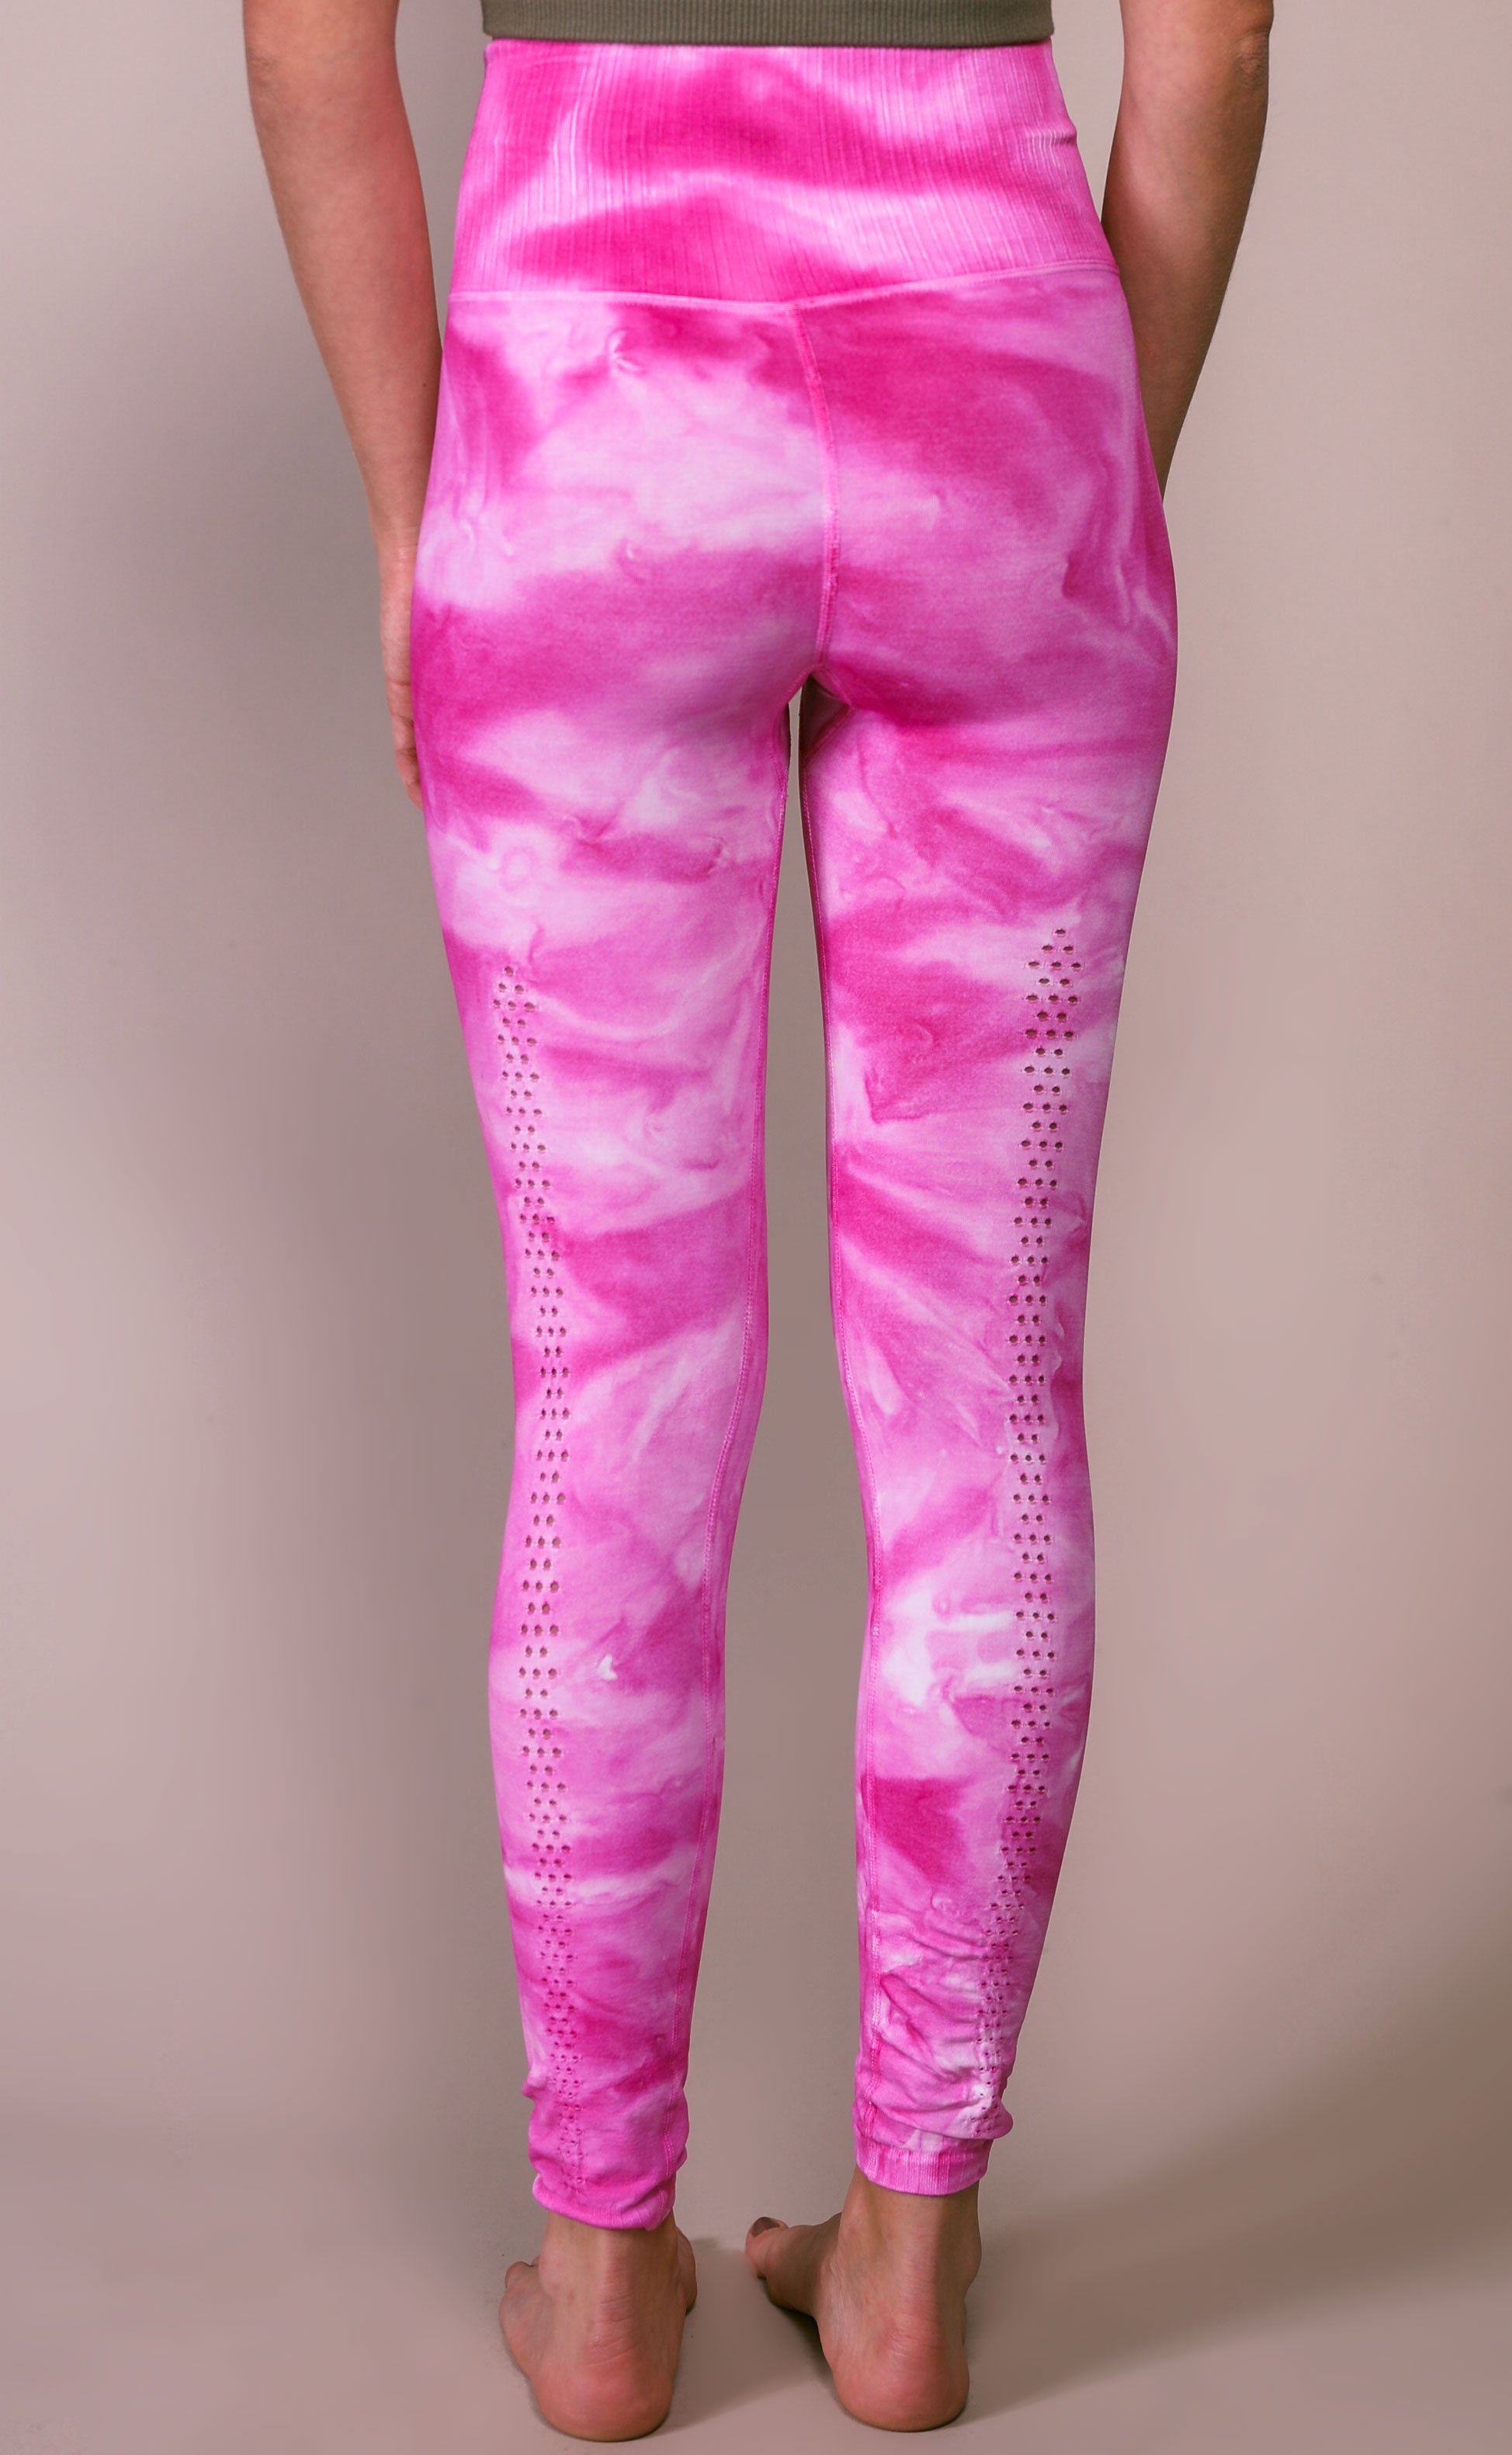 Free People NEW FP Movement 7/8 Length Good Karma Pink Tie Dye Leggings - M/L  Size M - $49 (37% Off Retail) - From Awesome